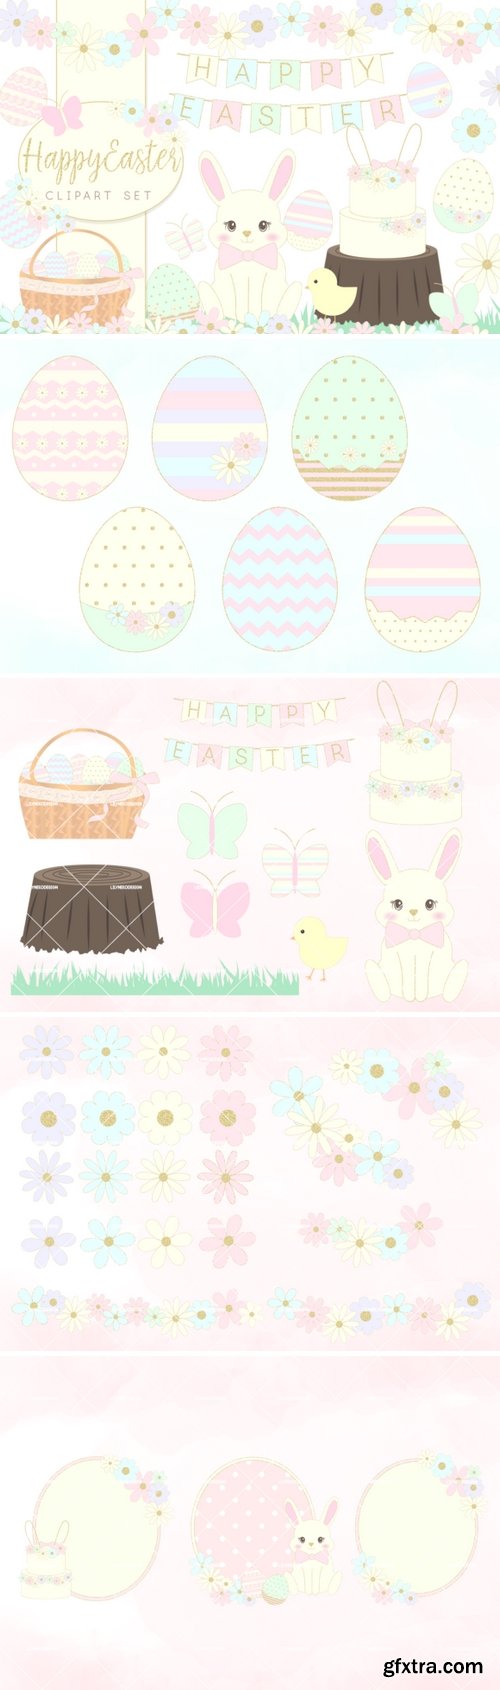 Easter Bunny and Eggs Clipart set